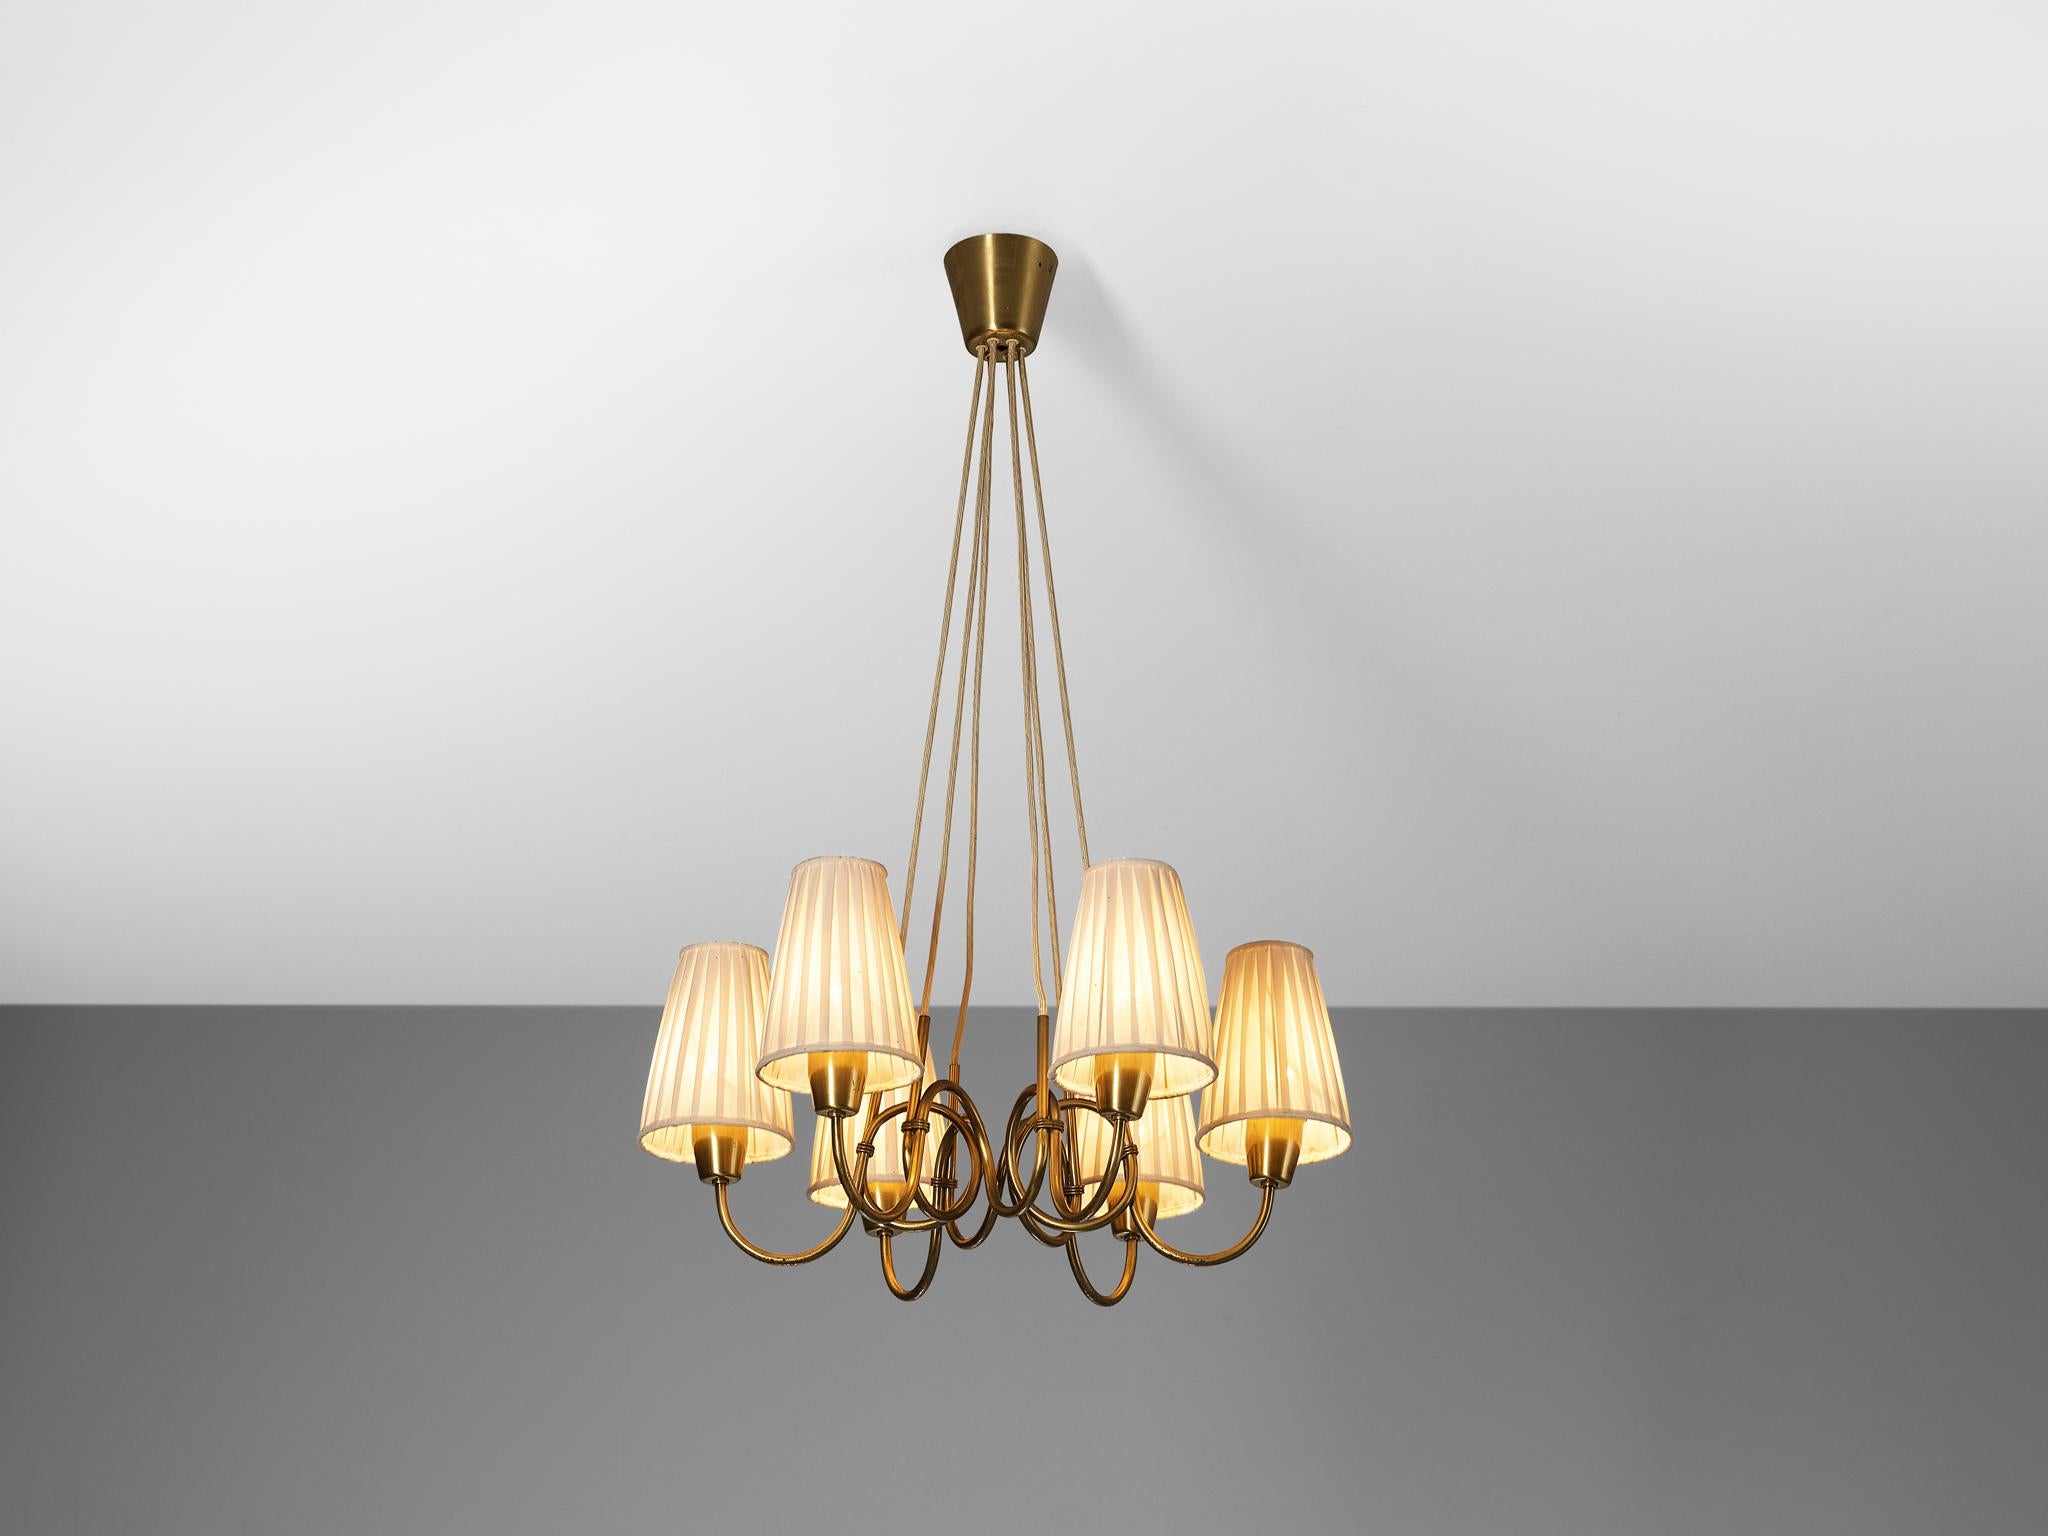 Hans Bergström for Ateljé Lyktan, chandelier, model no. 7 ‘Grisarumpan’, brass, fabric, Sweden, 1934-1940

This wonderful early chandelier was designed by renowned Swedish architect and design Hans Bergström in the second half of the 1930s for his